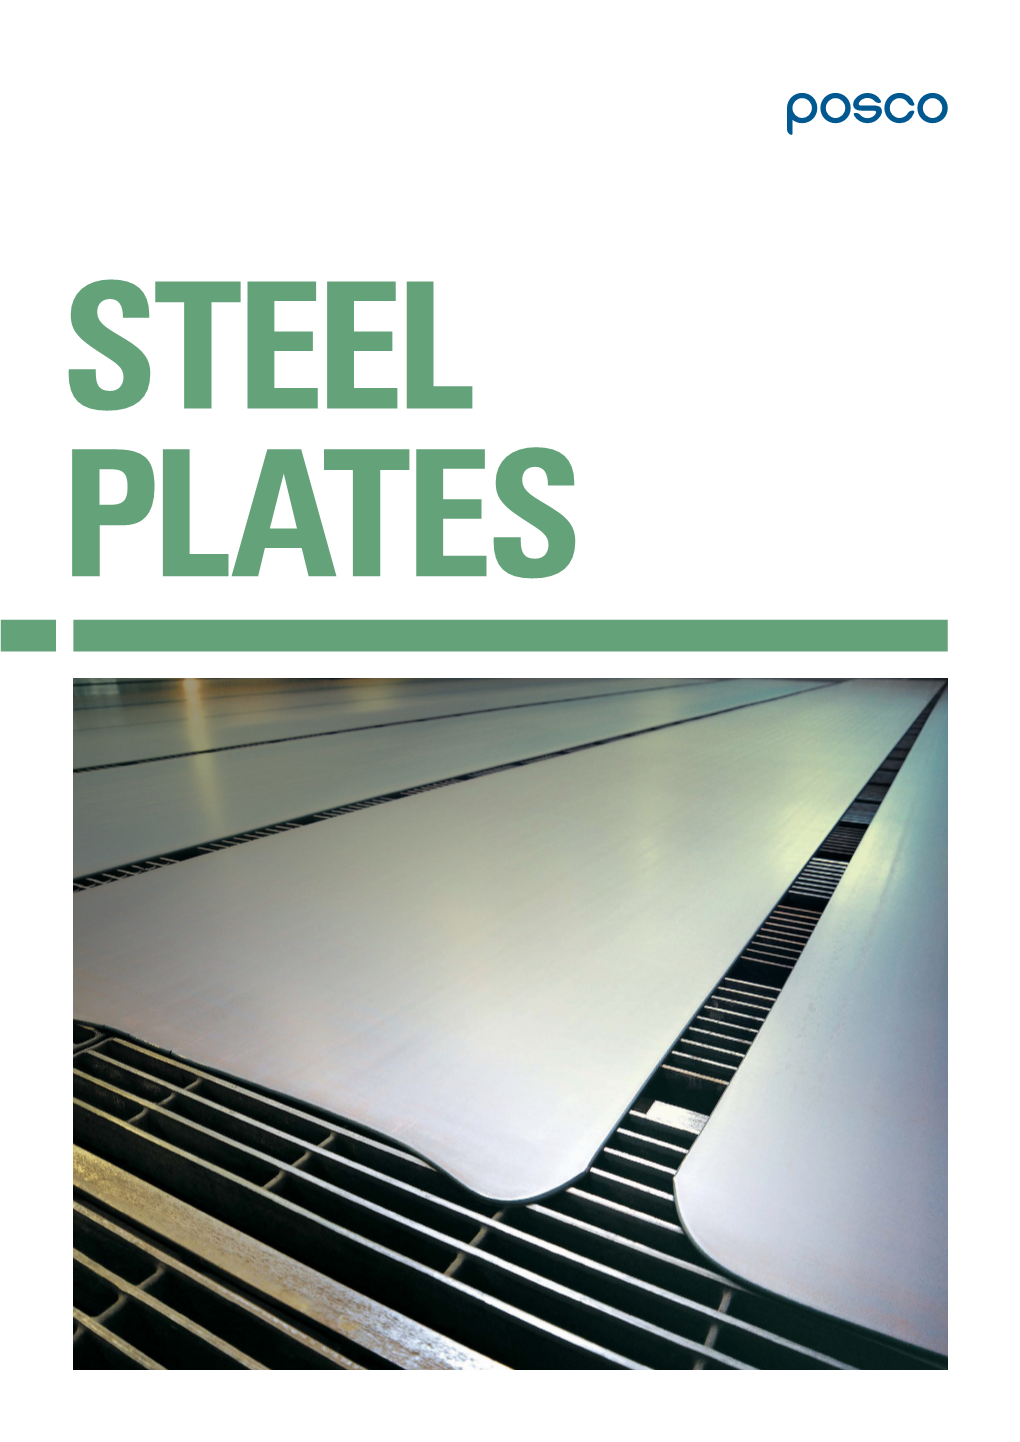 STEEL PLATES Contents